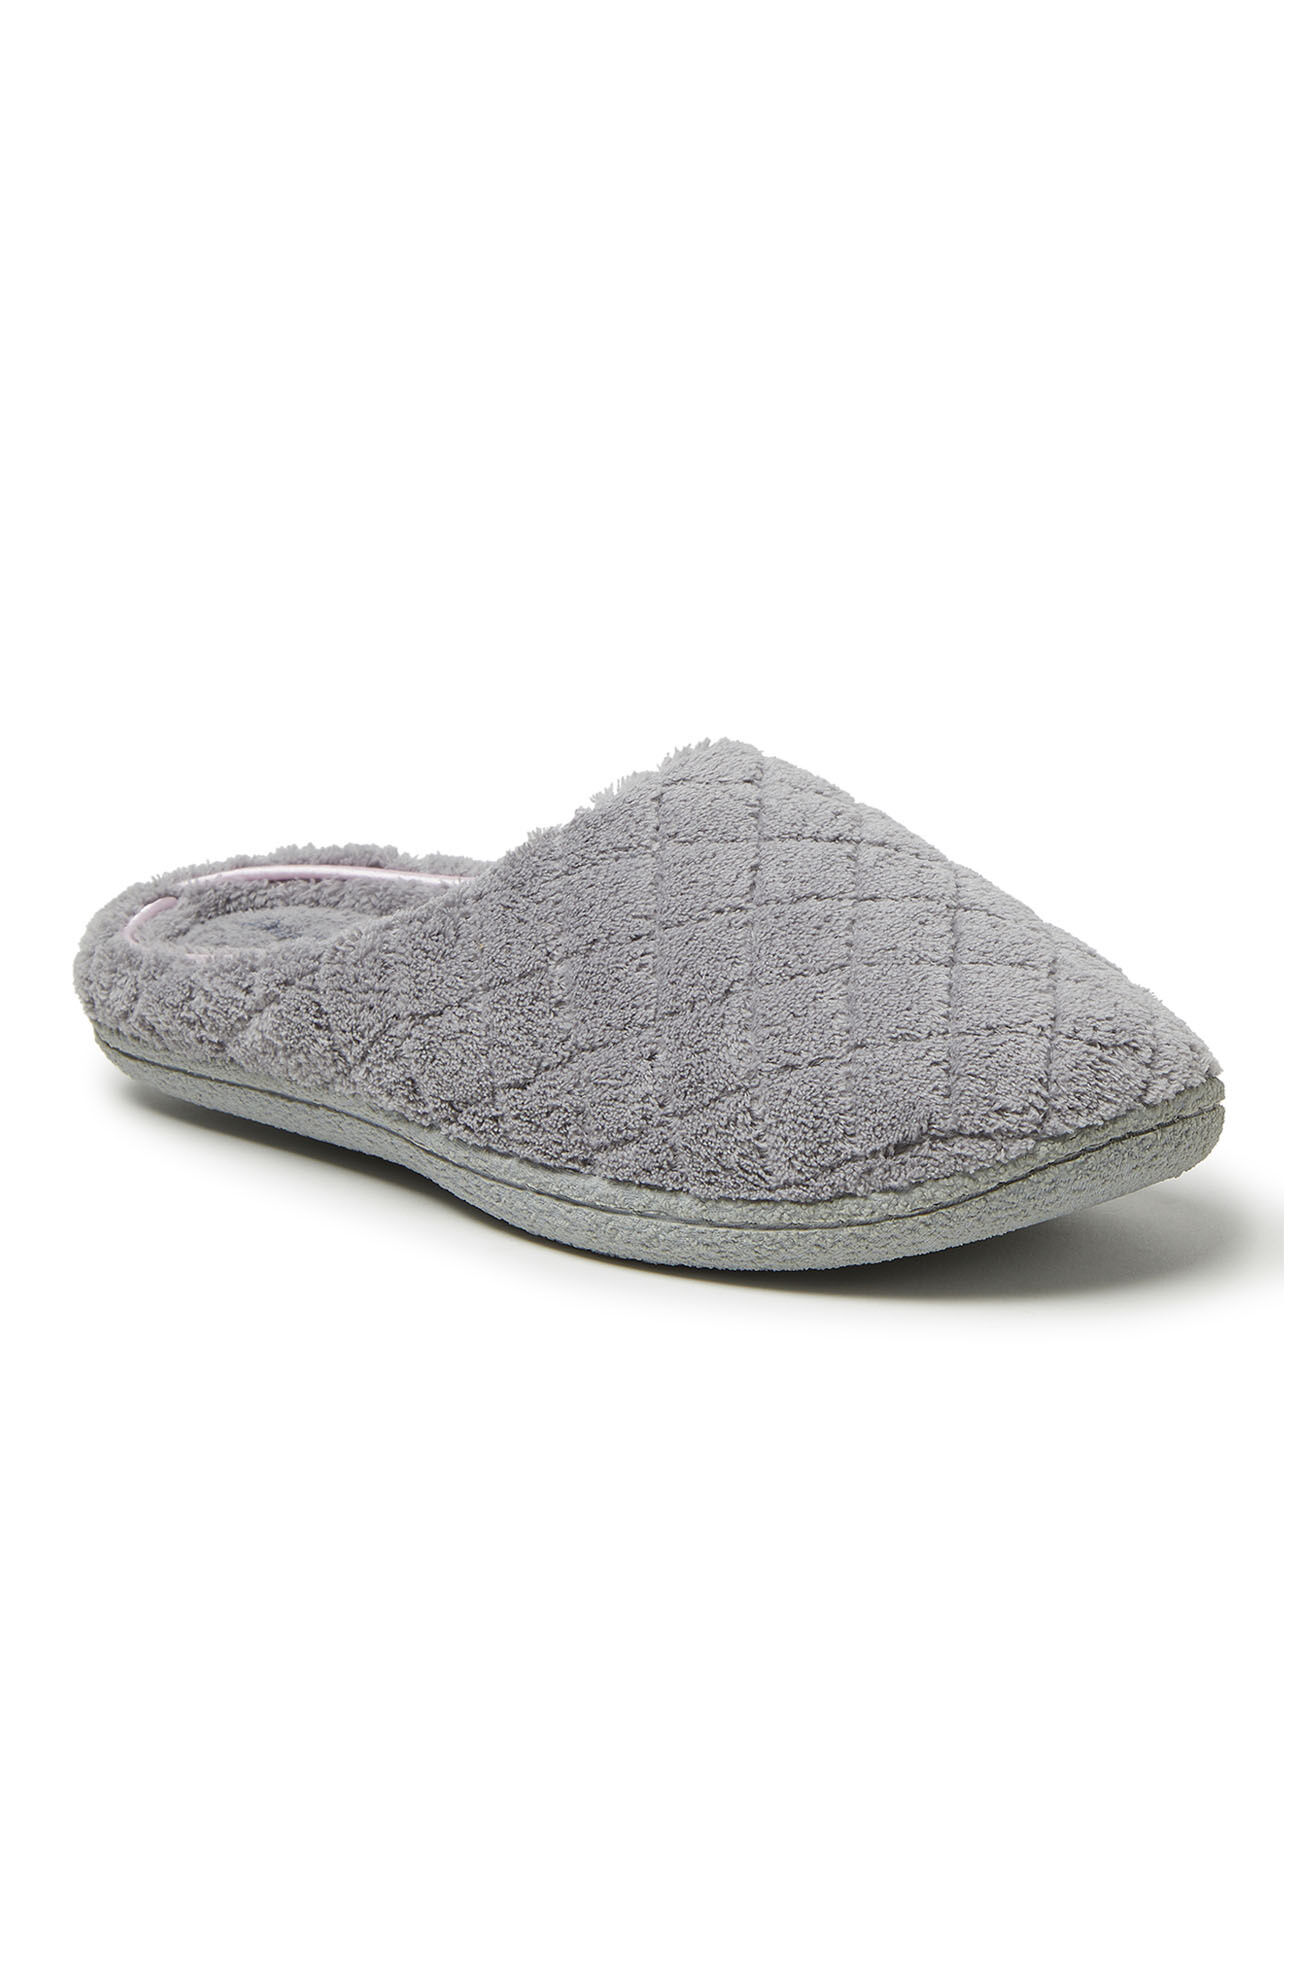 Wide Width Women's Leslie Quilted Terry Clog Slipper by Dearfoams in Medium Grey (Size M W)